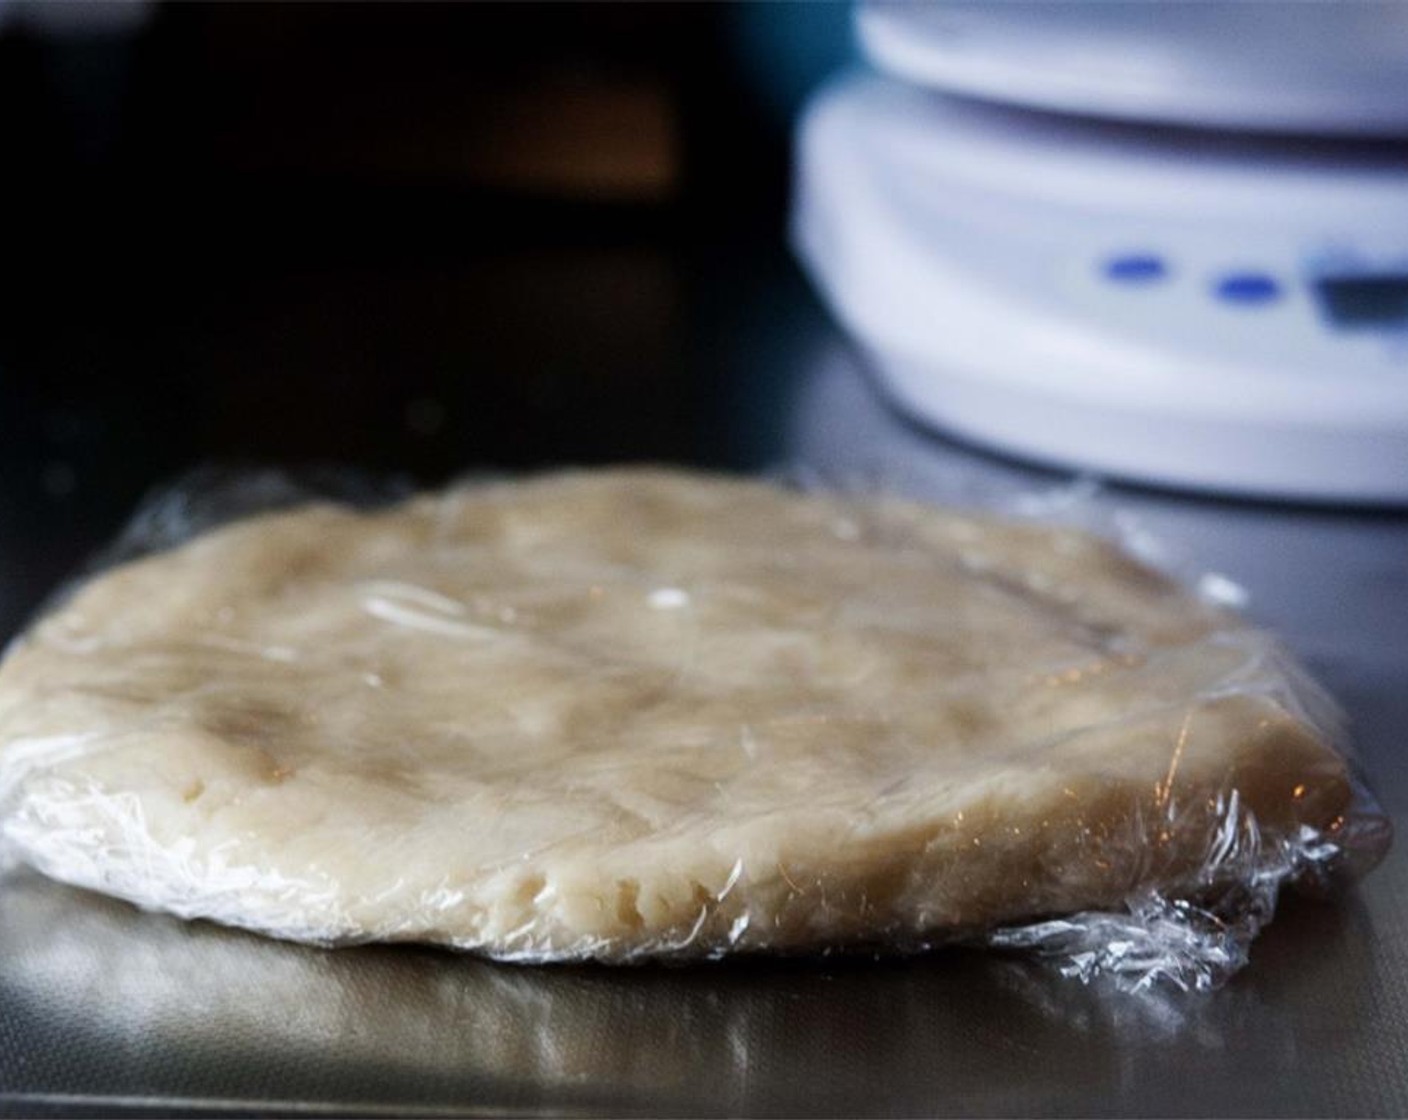 step 5 Flatten the dough into a round shape and wrap it in plastic wrap. Place it in your freezer for about 30 minutes.